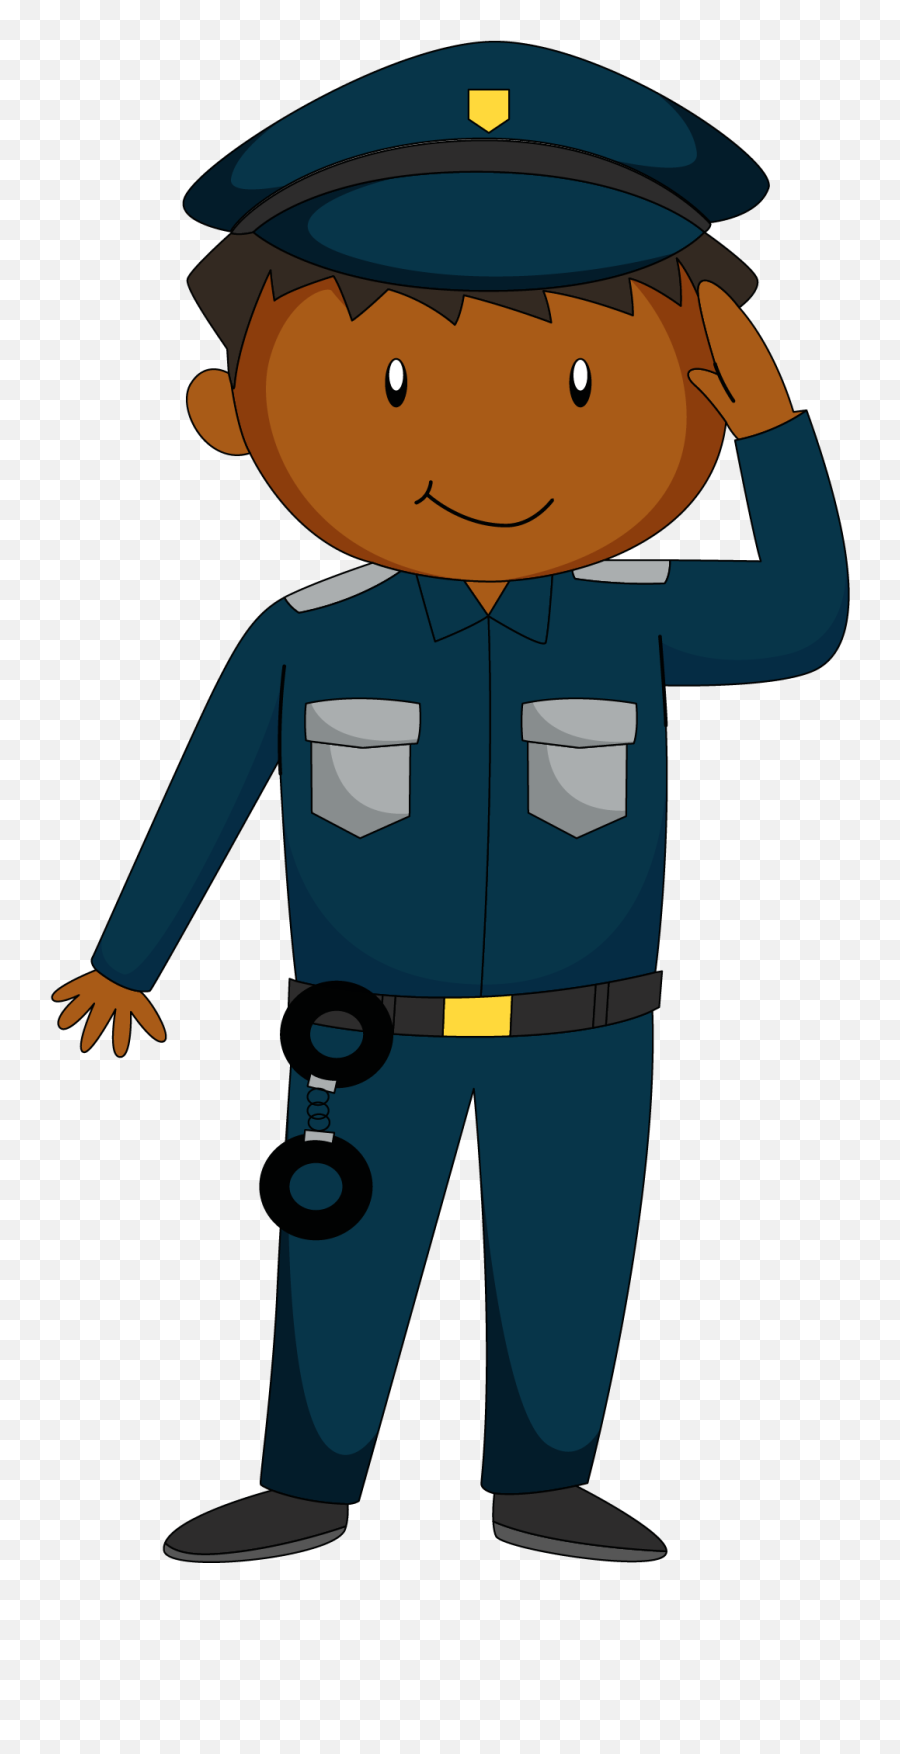 Police Officer Cartoon Png Clipart - Cartoon Images Of Guards,Salute Png